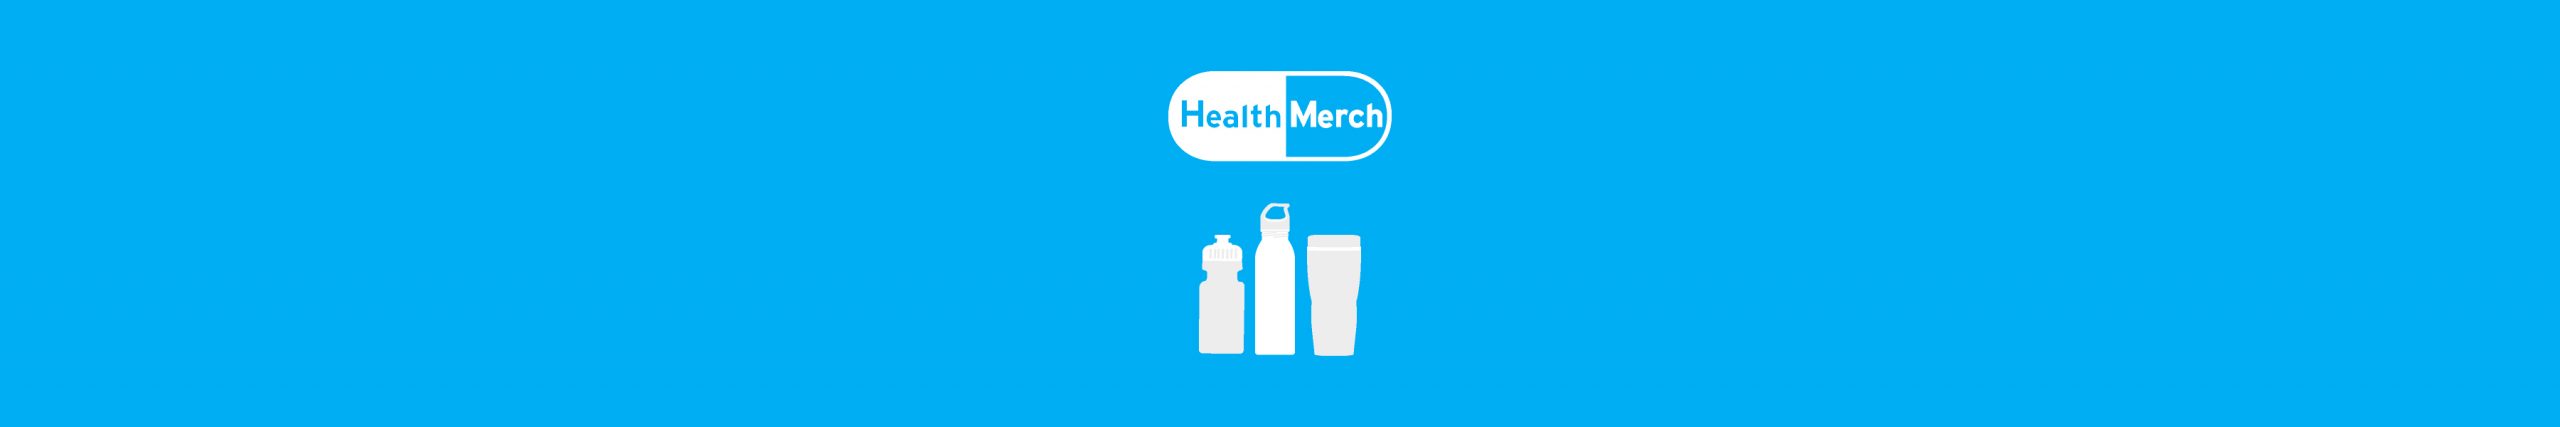 Customizable Health Campaigns for Community Outreach